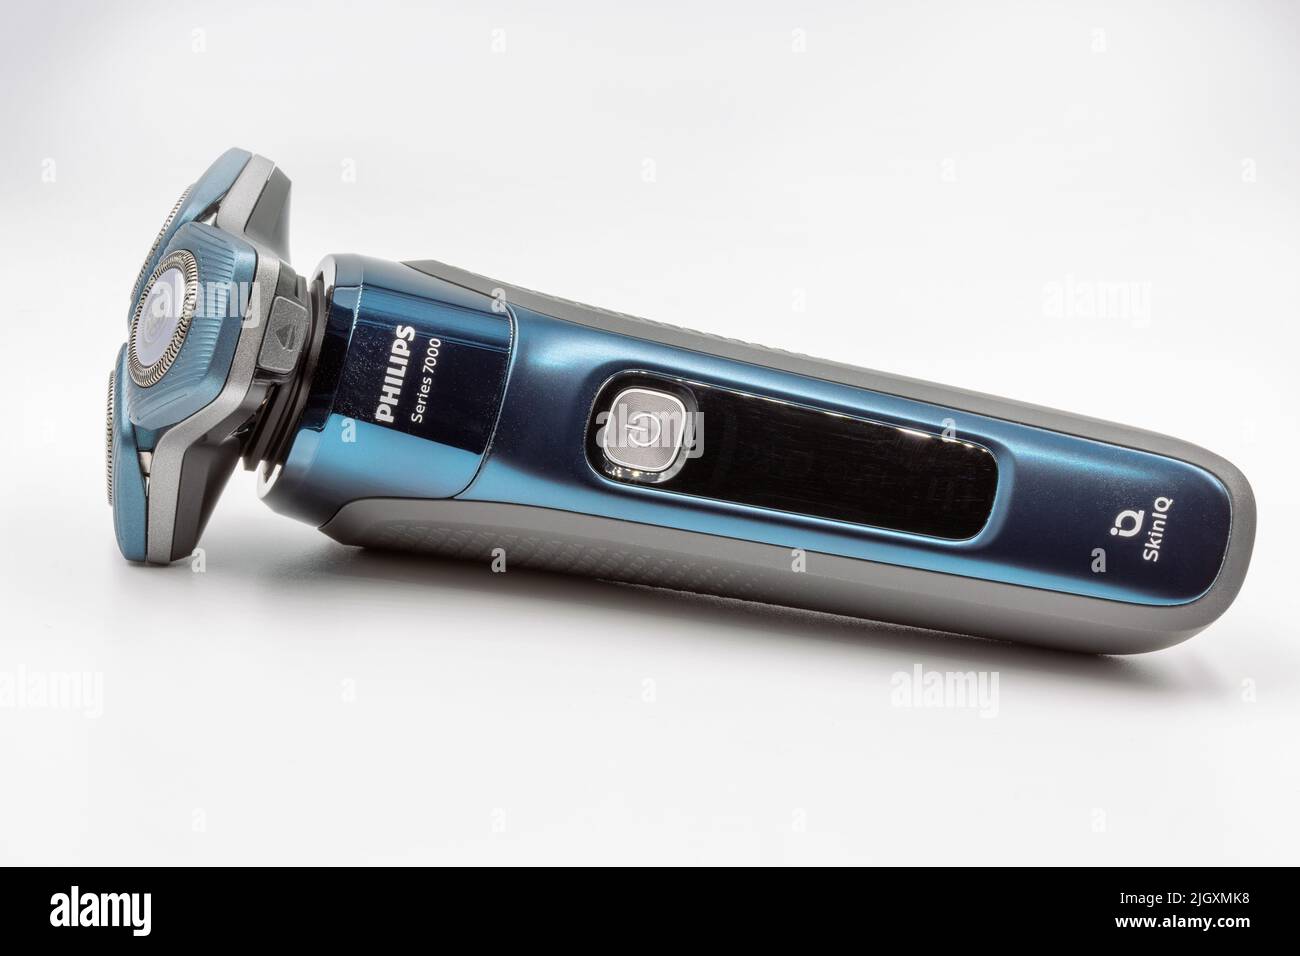 Kyiv, Ukraine - April 03, 2021: Studio shot of modern Philips electric shaver 7000 series closeup against white. Philips is a Dutch multinational cong Stock Photo